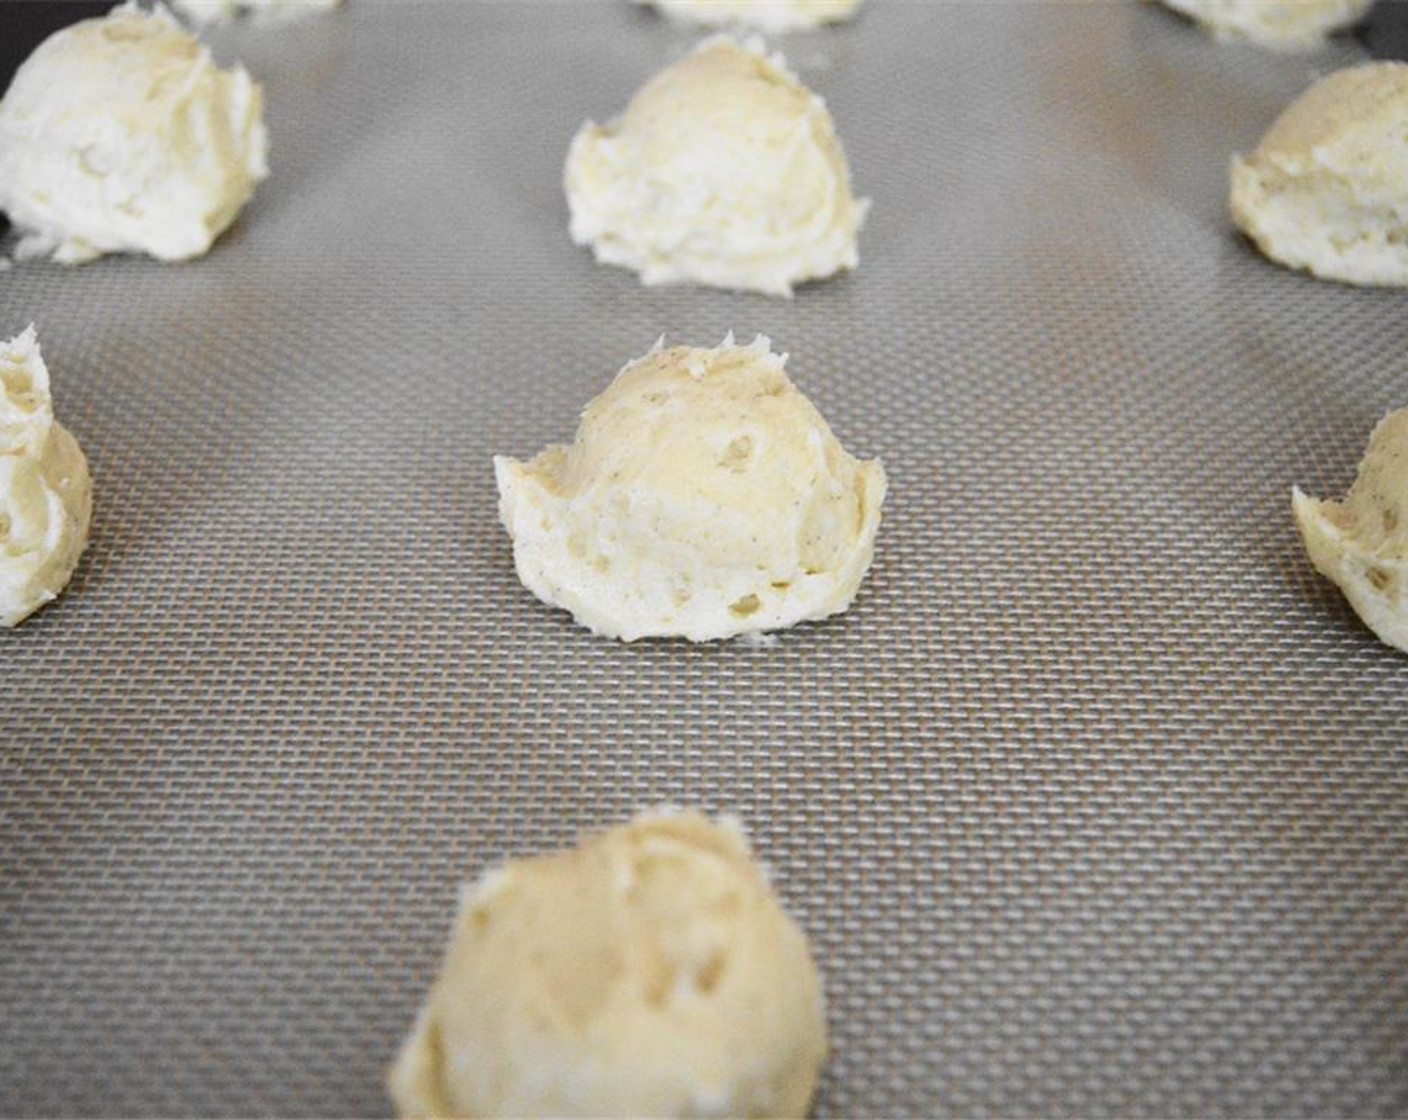 step 6 Use a 1.5 inch cookie scoop to scoop perfect little dollops of the dough onto the prepared baking sheets. Bake two trays at a time for about 15 minutes each batch. Rotate the sheets halfway through to make sure they bake evenly.